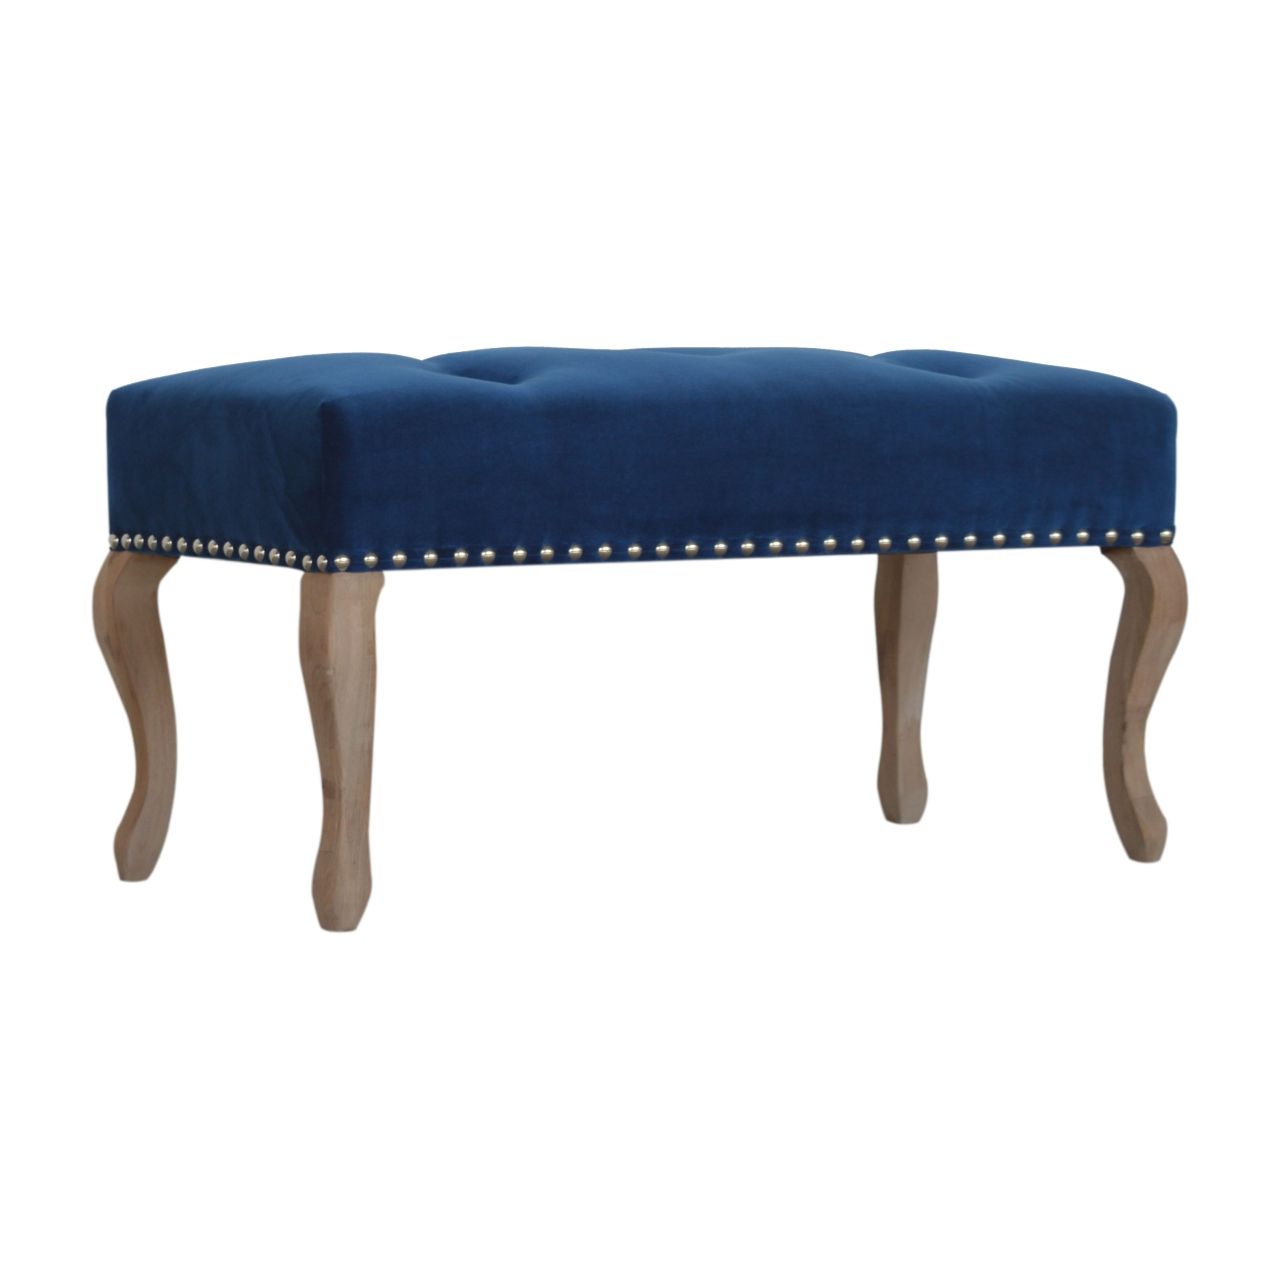 Wholesale French Style Royal Blue Velvet Bench, Dropship Pertaining To Artisan Blue Sofas (View 14 of 15)